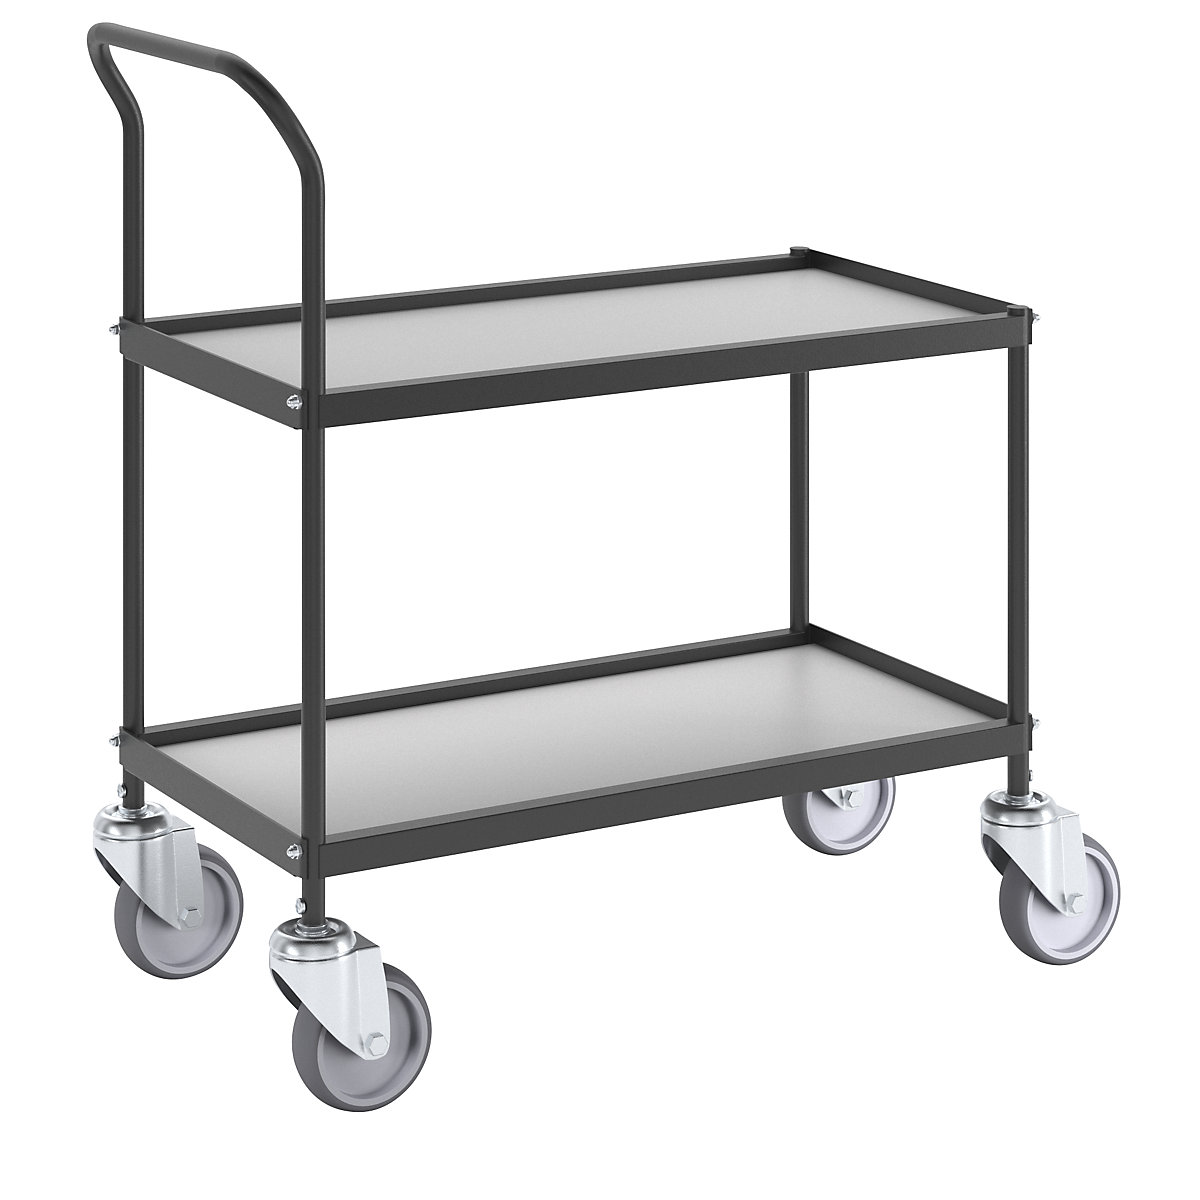 Serving and clearing trolley, 2 shelves, LxWxH 720 x 380 x 855 mm-13